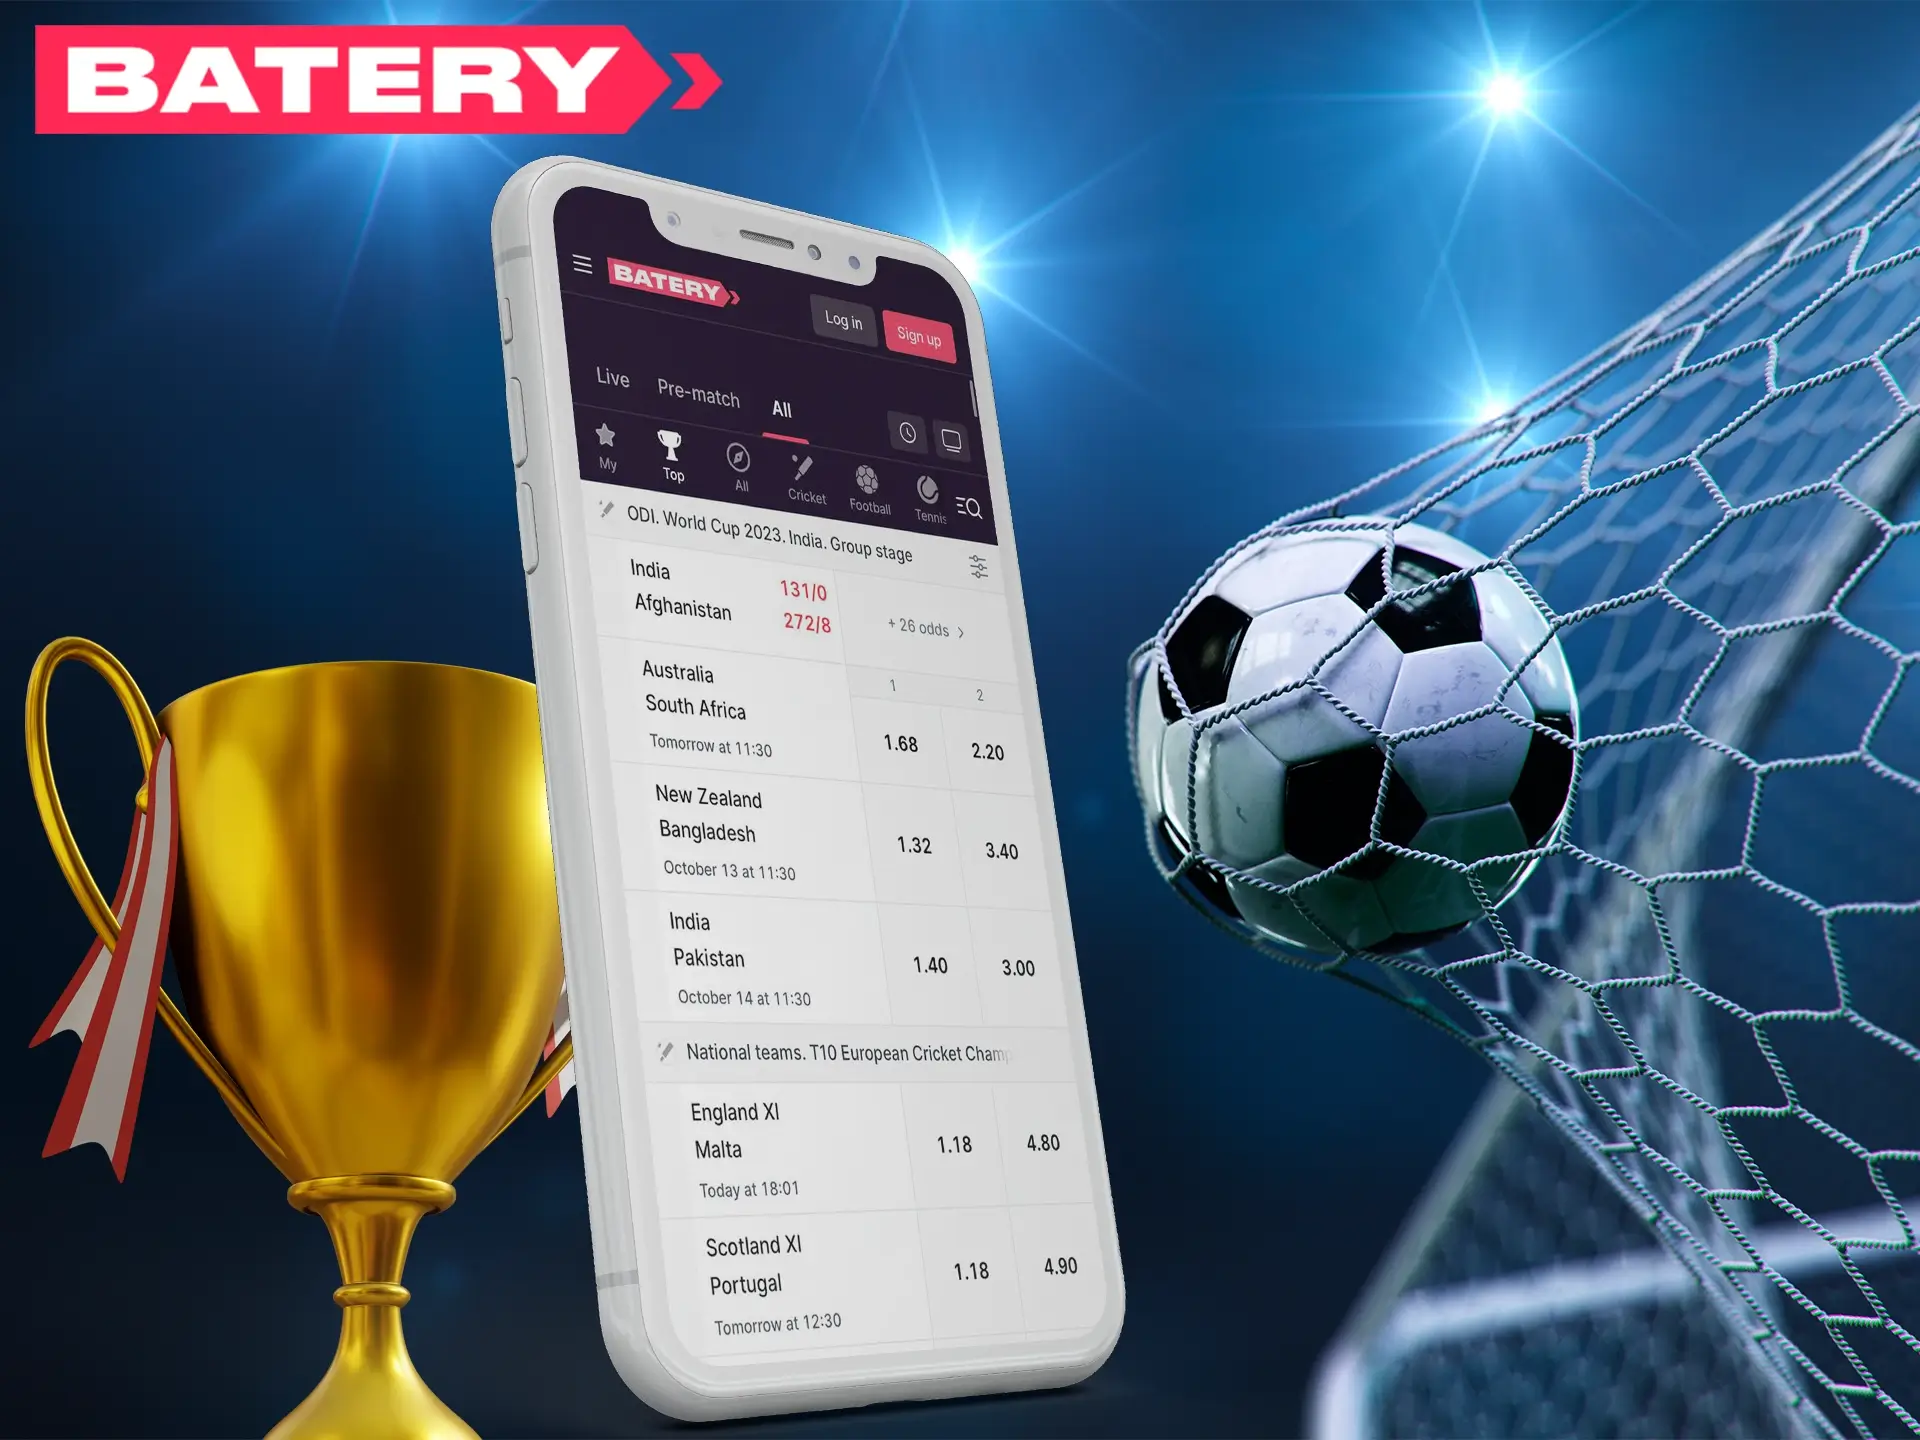 In the Batery app you will find a variety of sports disciplines and their tournaments.